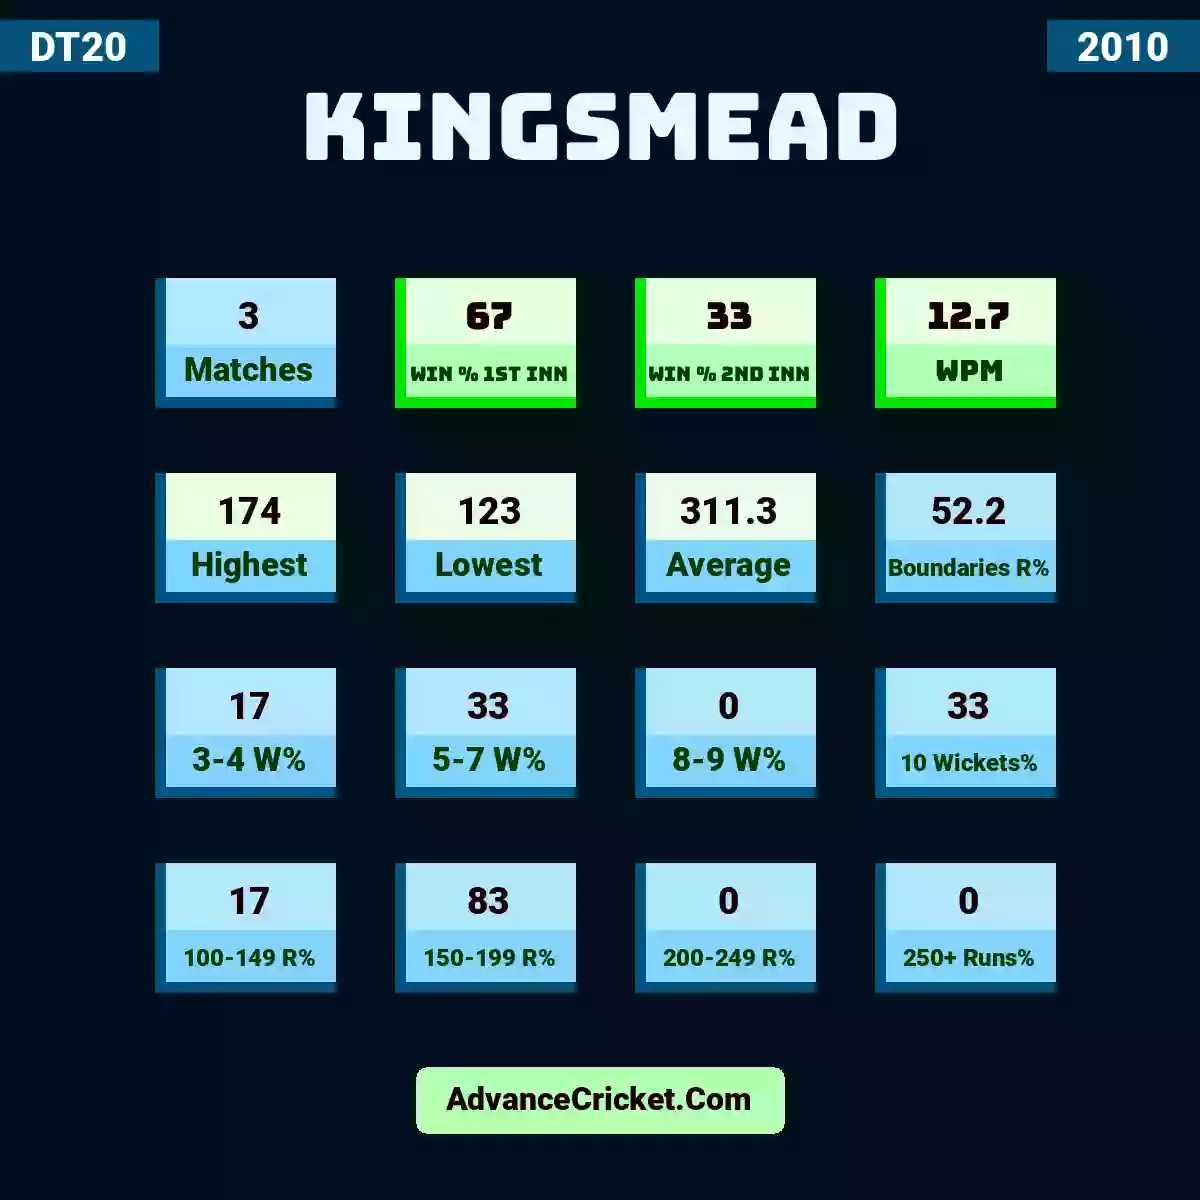 Image showing Kingsmead with Matches: 3, Win % 1st Inn: 67, Win % 2nd Inn: 33, WPM: 12.7, Highest: 174, Lowest: 123, Average: 311.3, Boundaries R%: 52.2, 3-4 W%: 17, 5-7 W%: 33, 8-9 W%: 0, 10 Wickets%: 33, 100-149 R%: 17, 150-199 R%: 83, 200-249 R%: 0, 250+ Runs%: 0.